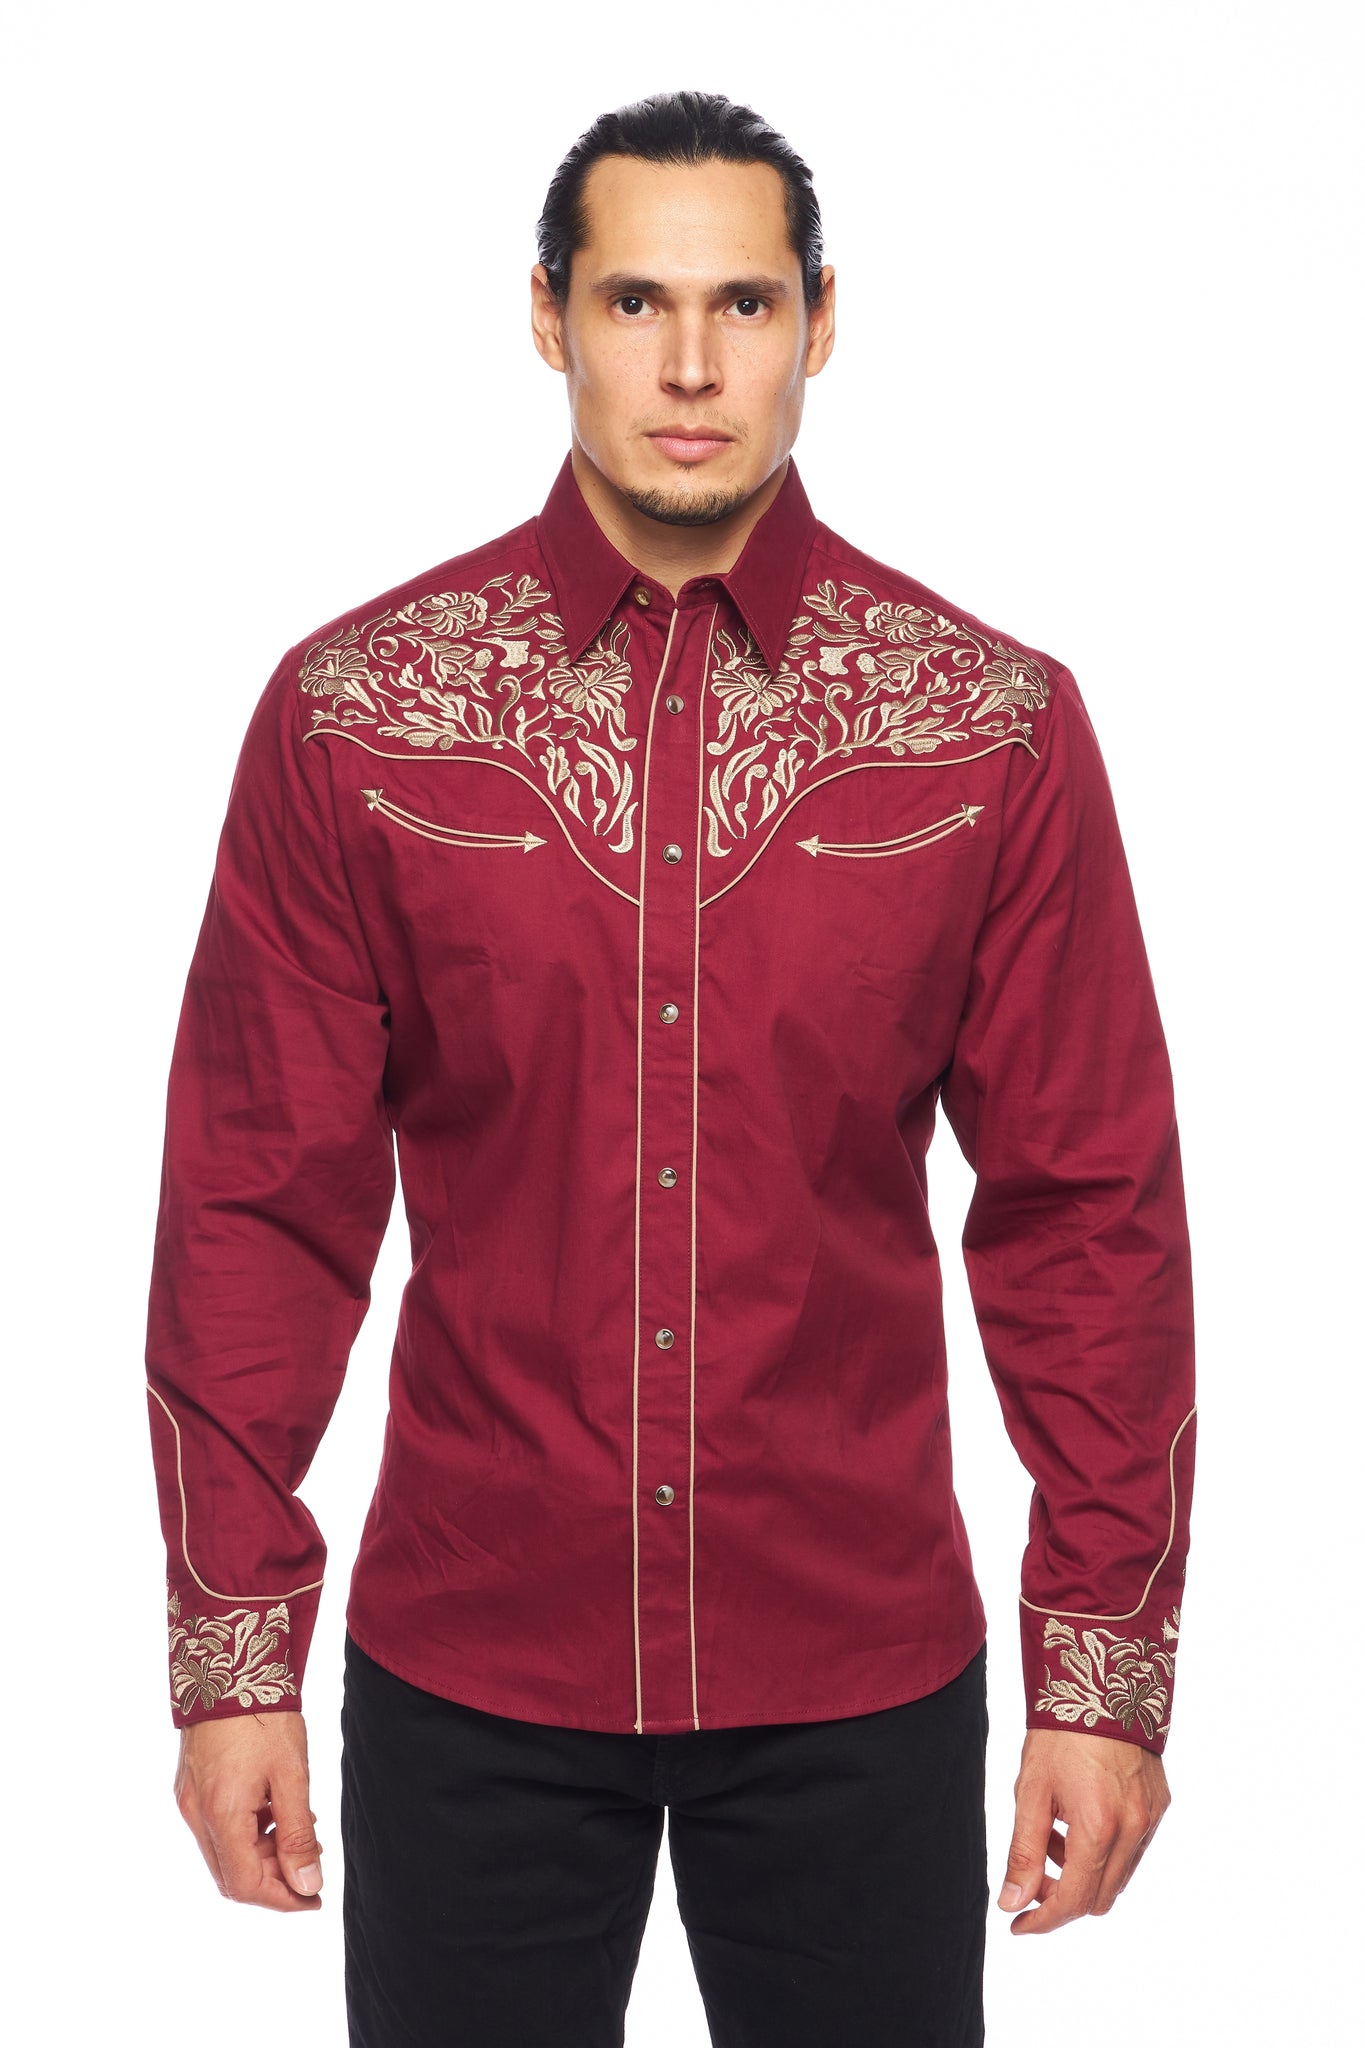 Men's Western Cowboy Embroidery Shirt -PS500L-563